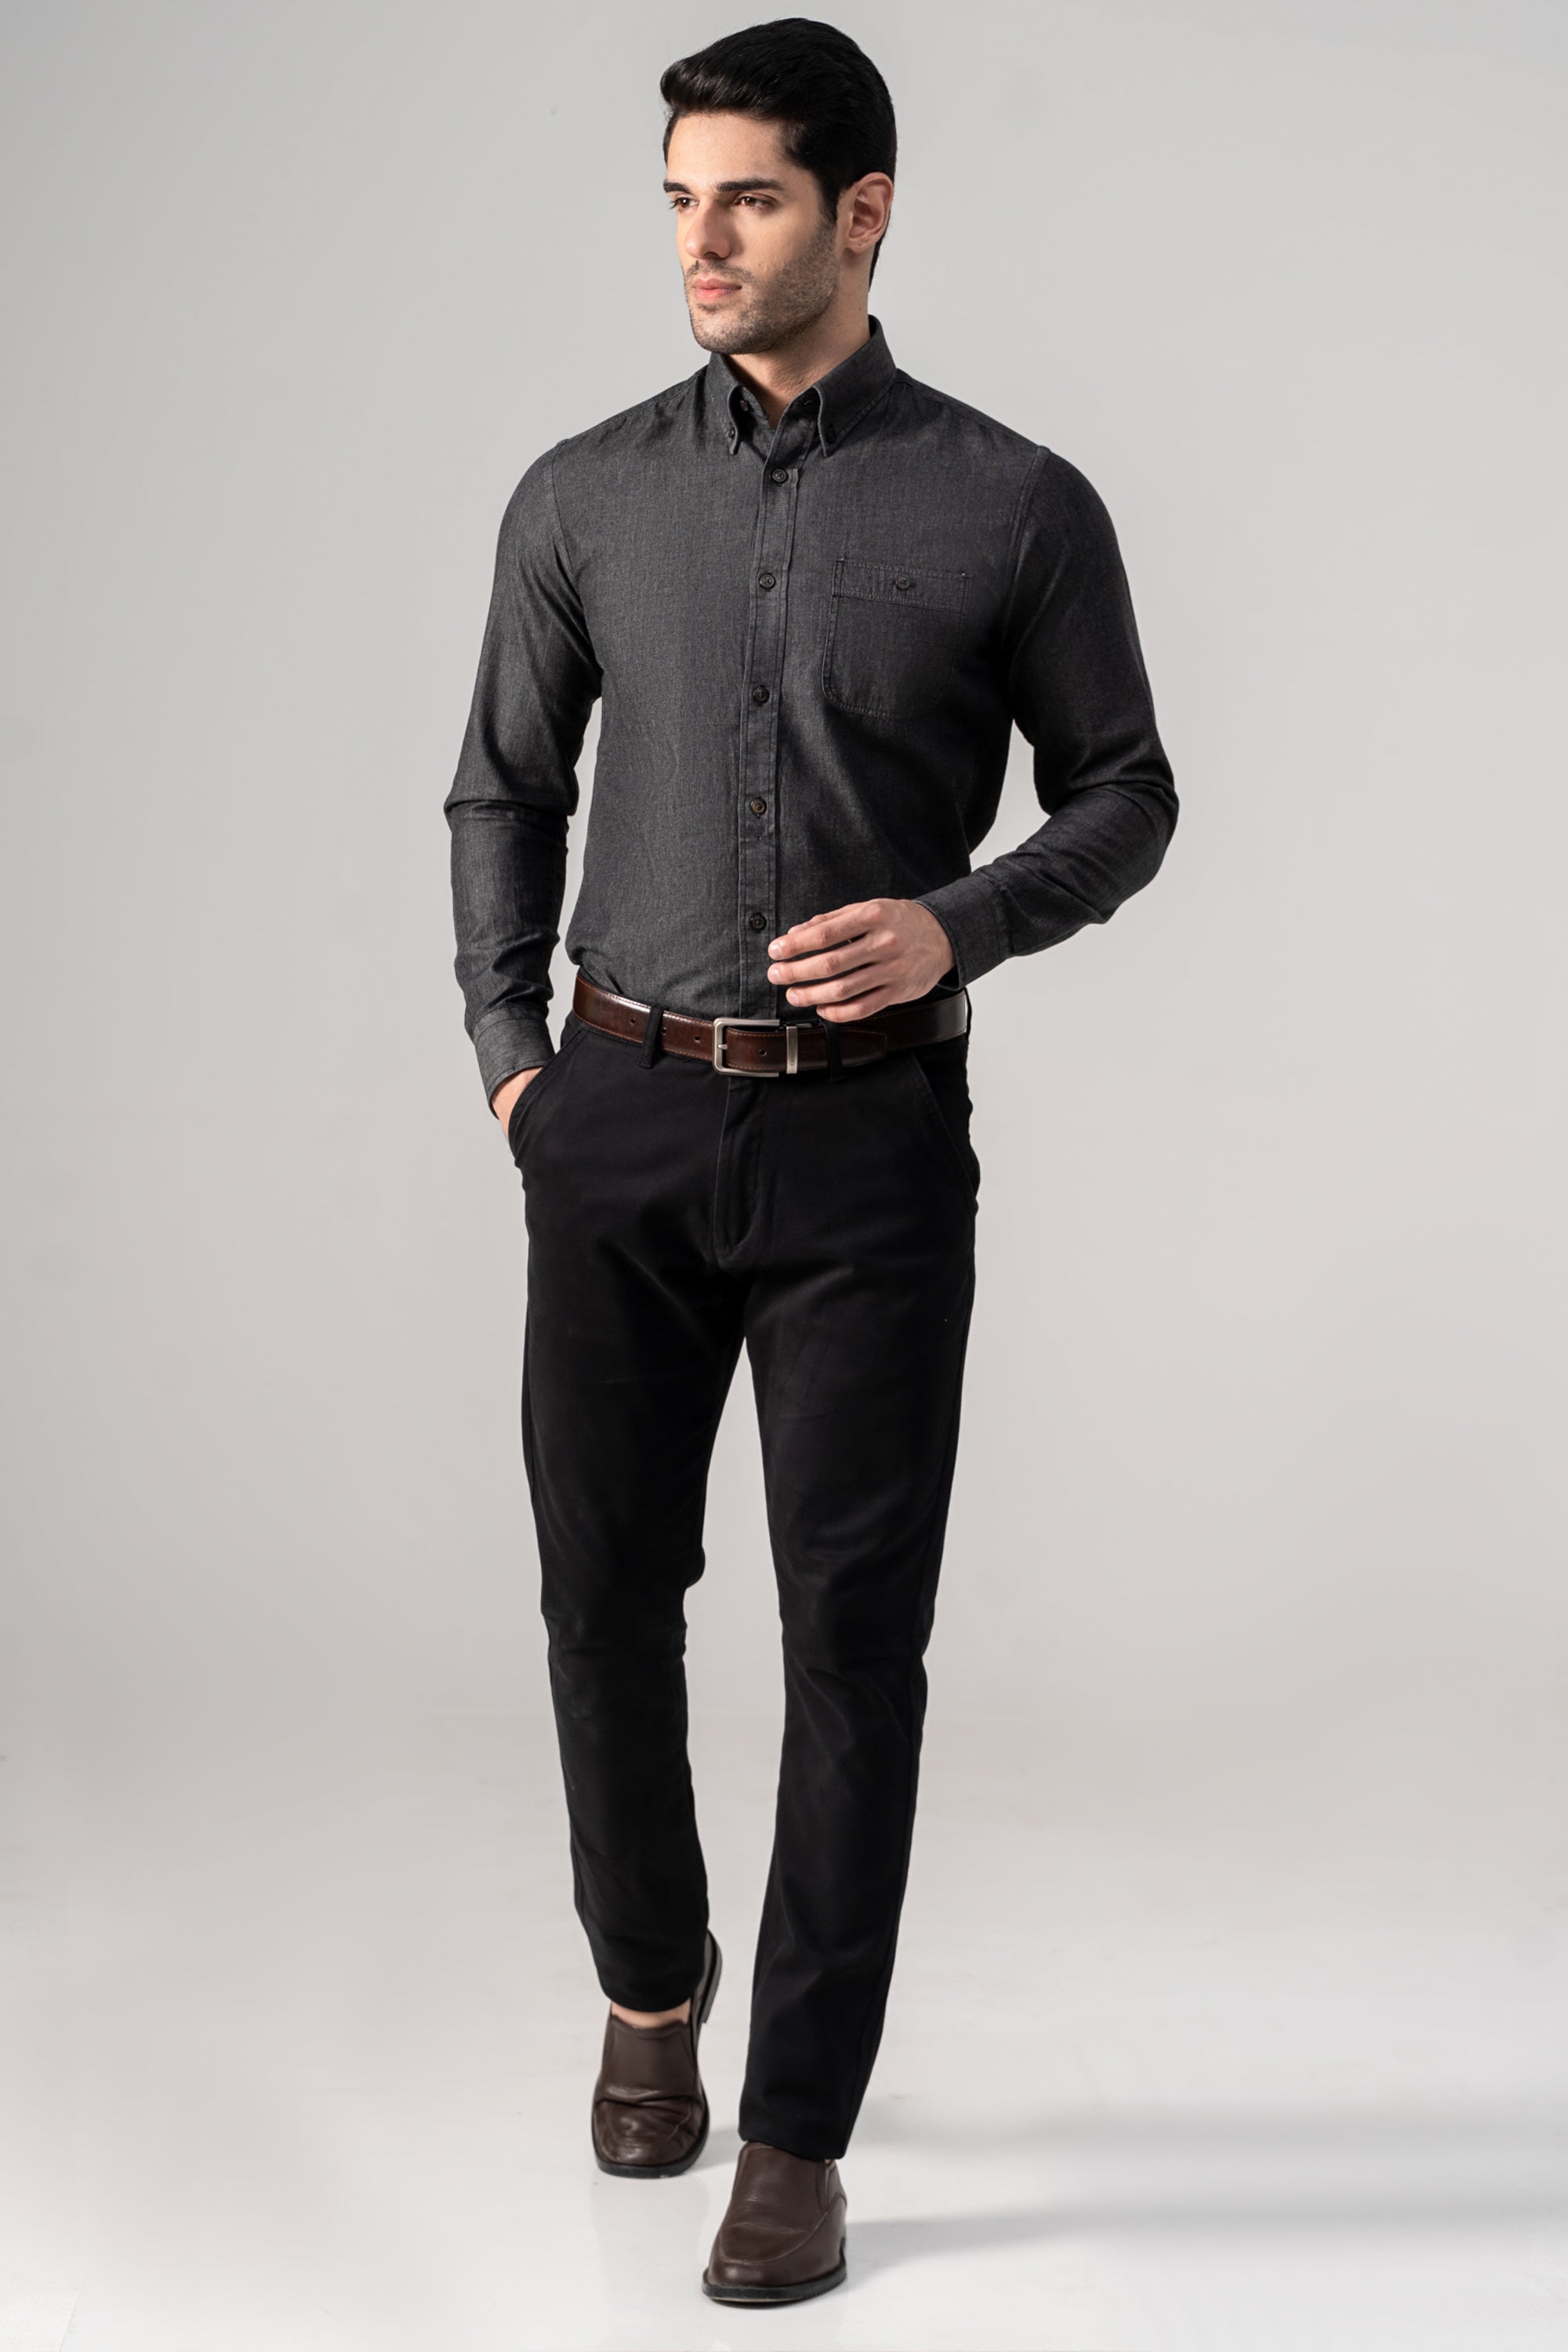 Black Shirt with Grey Pants Dinner Date Outfit